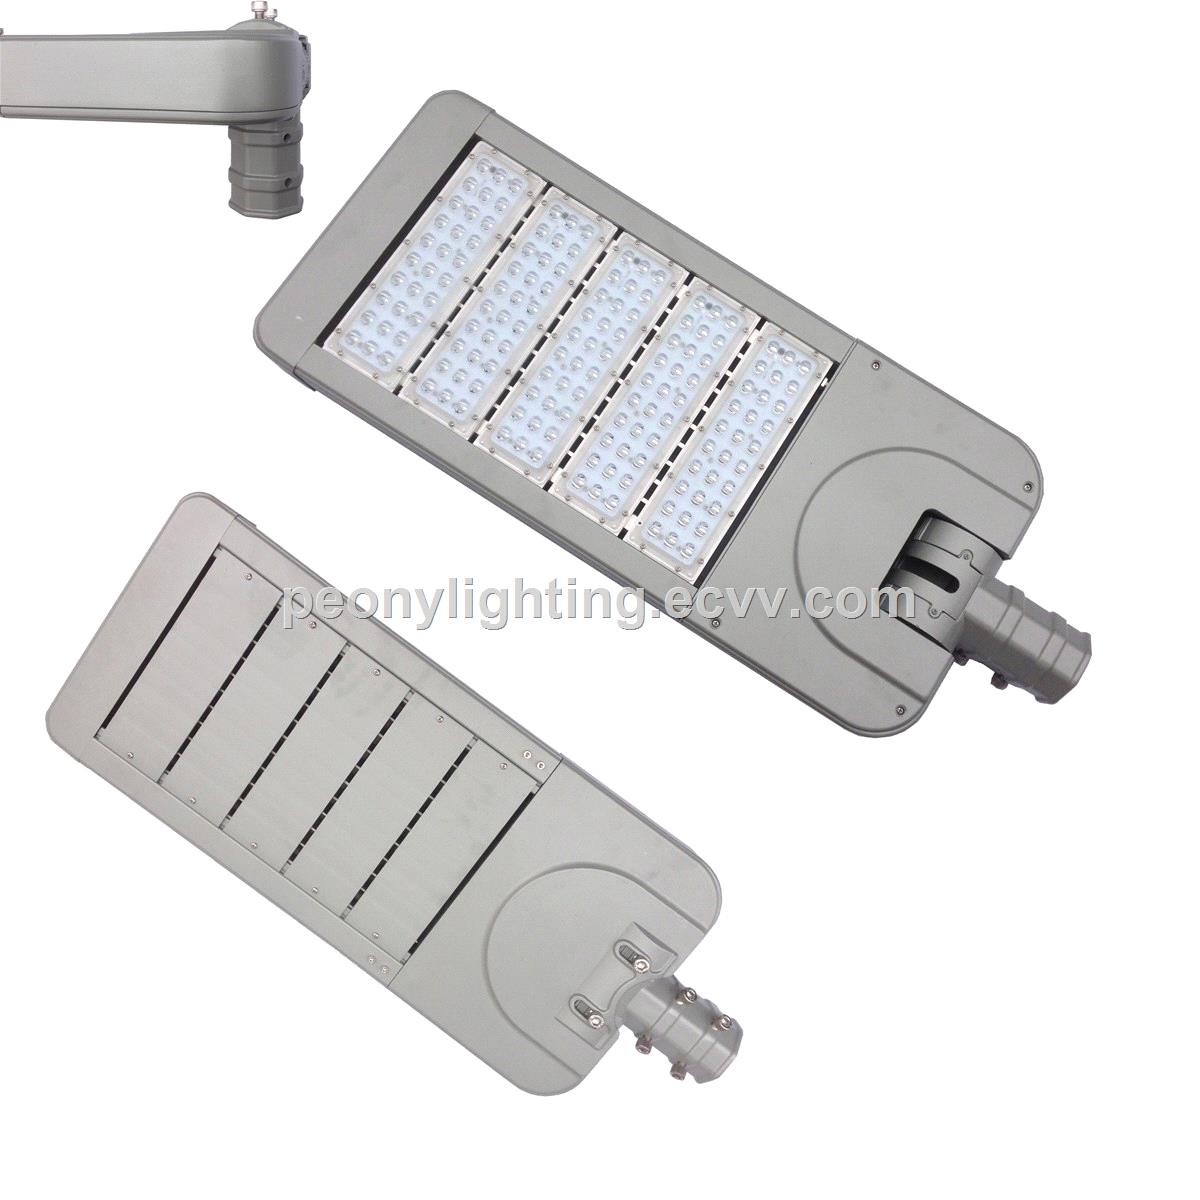 BIG SALE 250w outdoor adjustable LED street light cheap led street light solar with CE ROHS approval